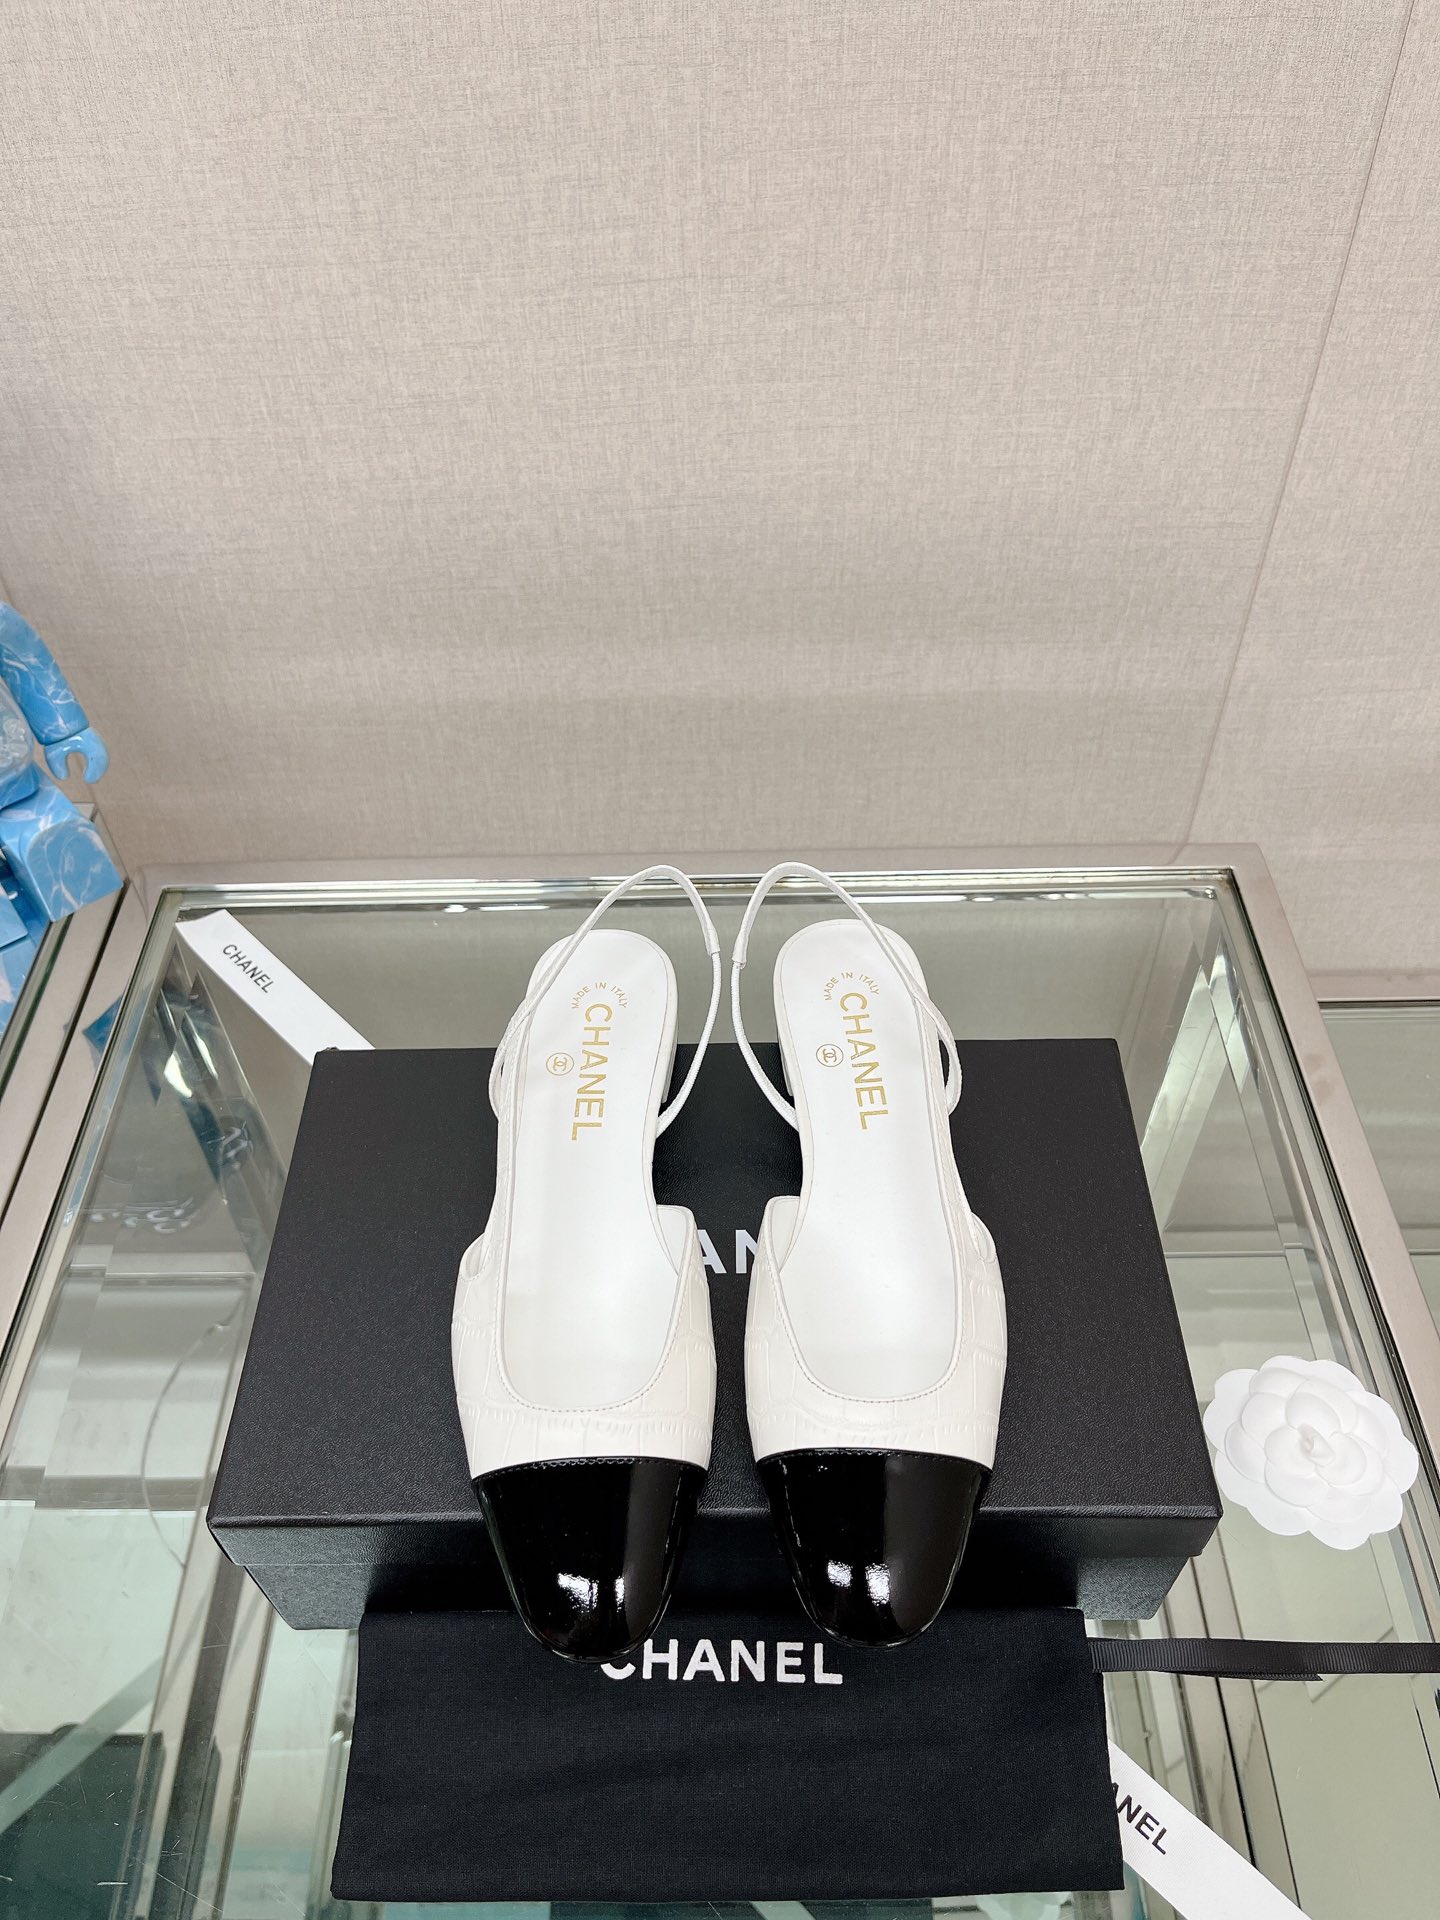 Chanel Shoes Sandals Cowhide Genuine Leather Sheepskin